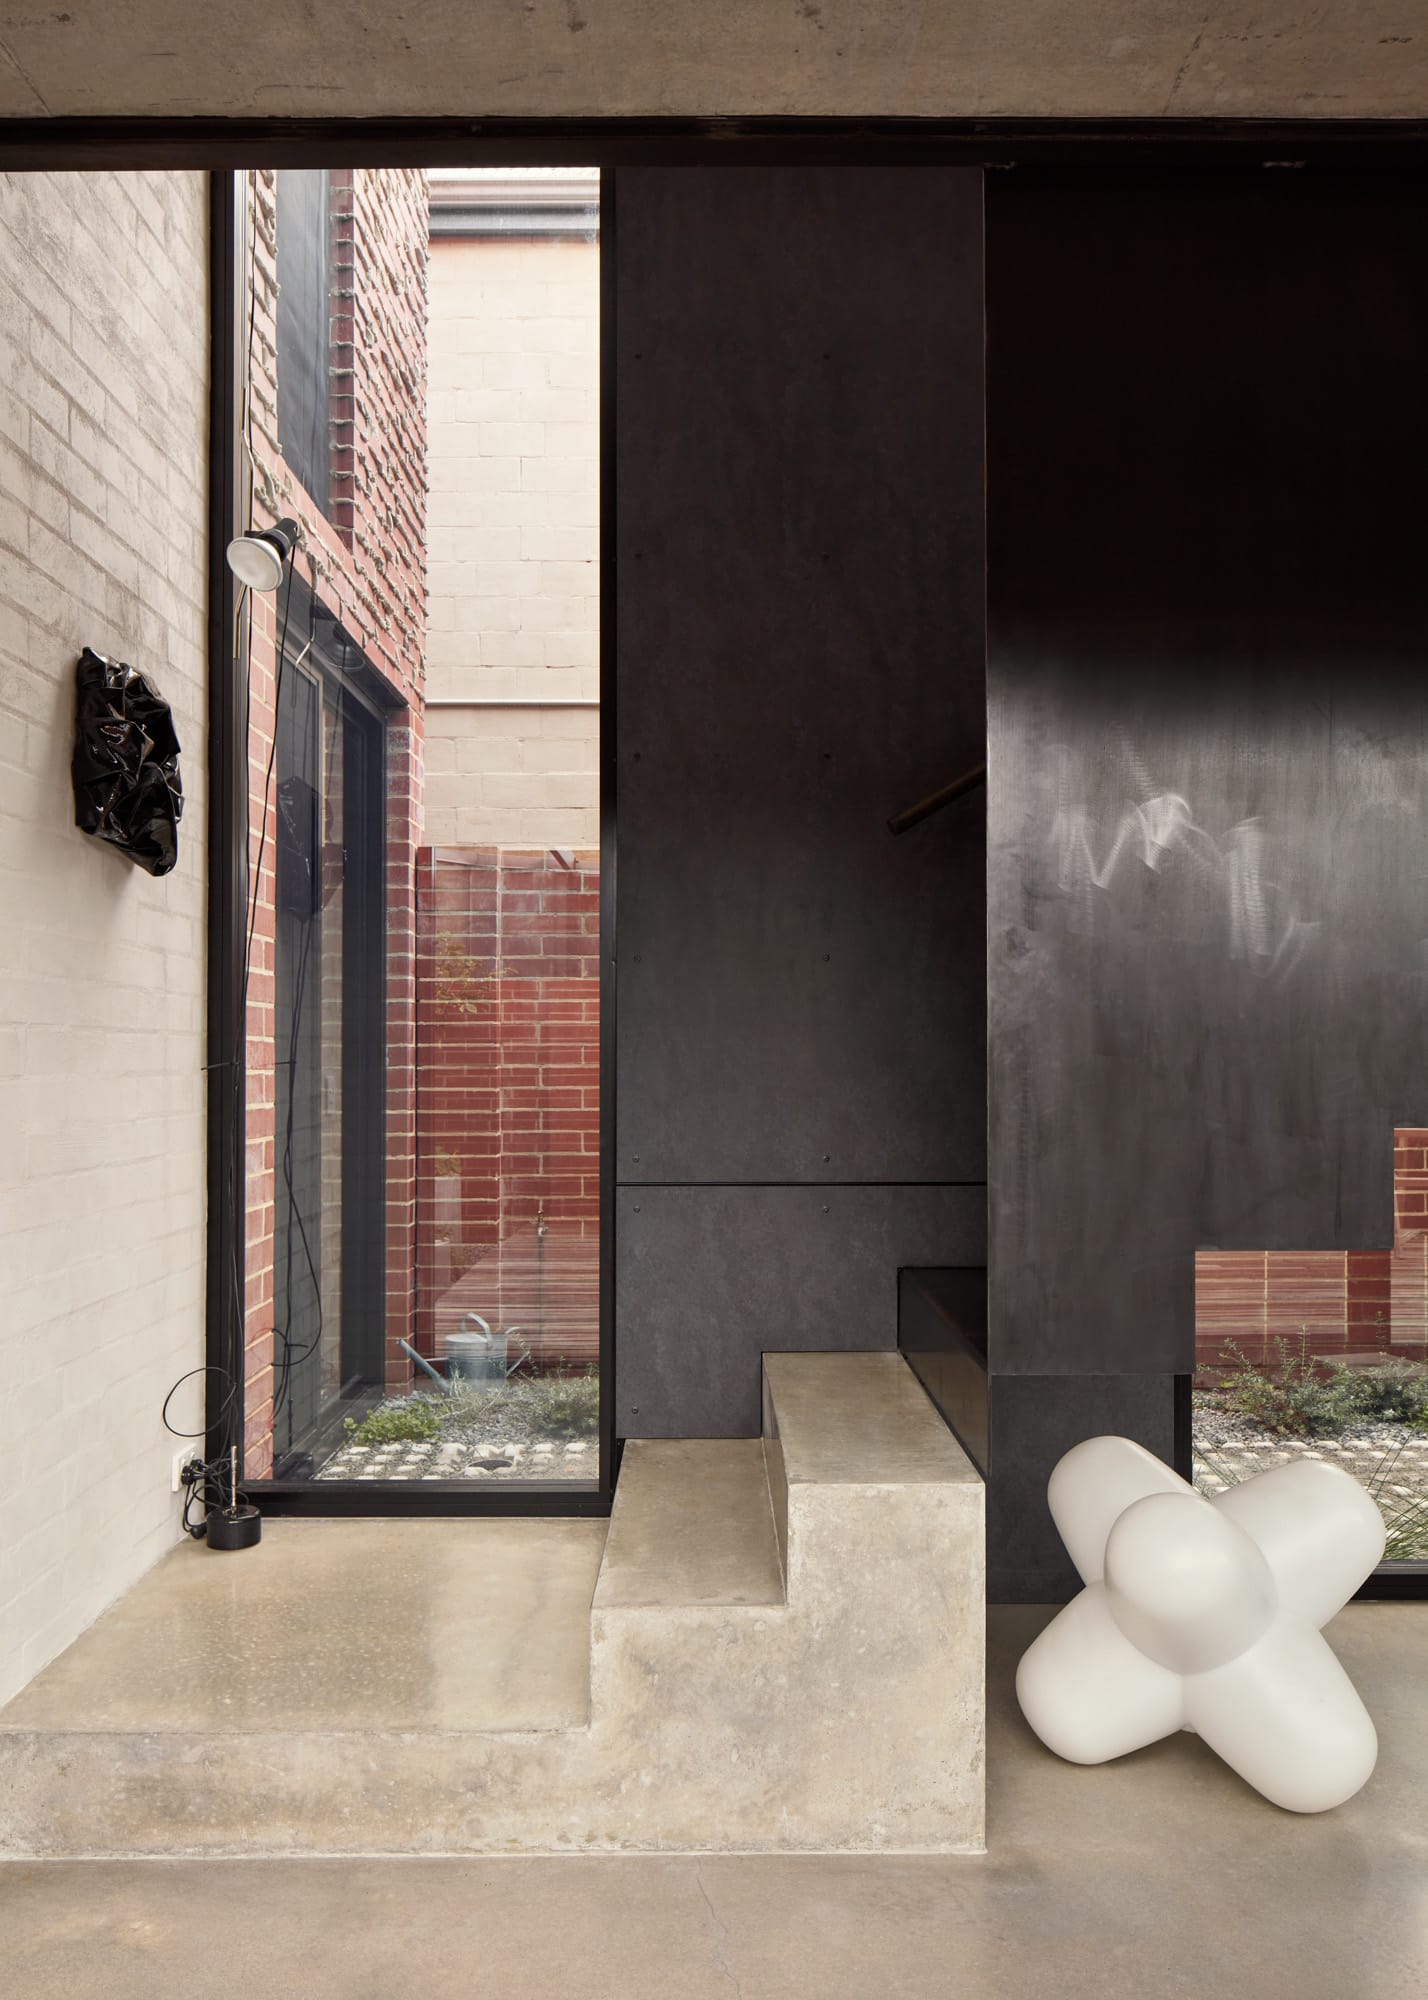 Brick House by Studio Roam. Photography by Jack Lovel. Concrete and steel staircase. Polished concrete floors. Abstract white sculpture to right. 